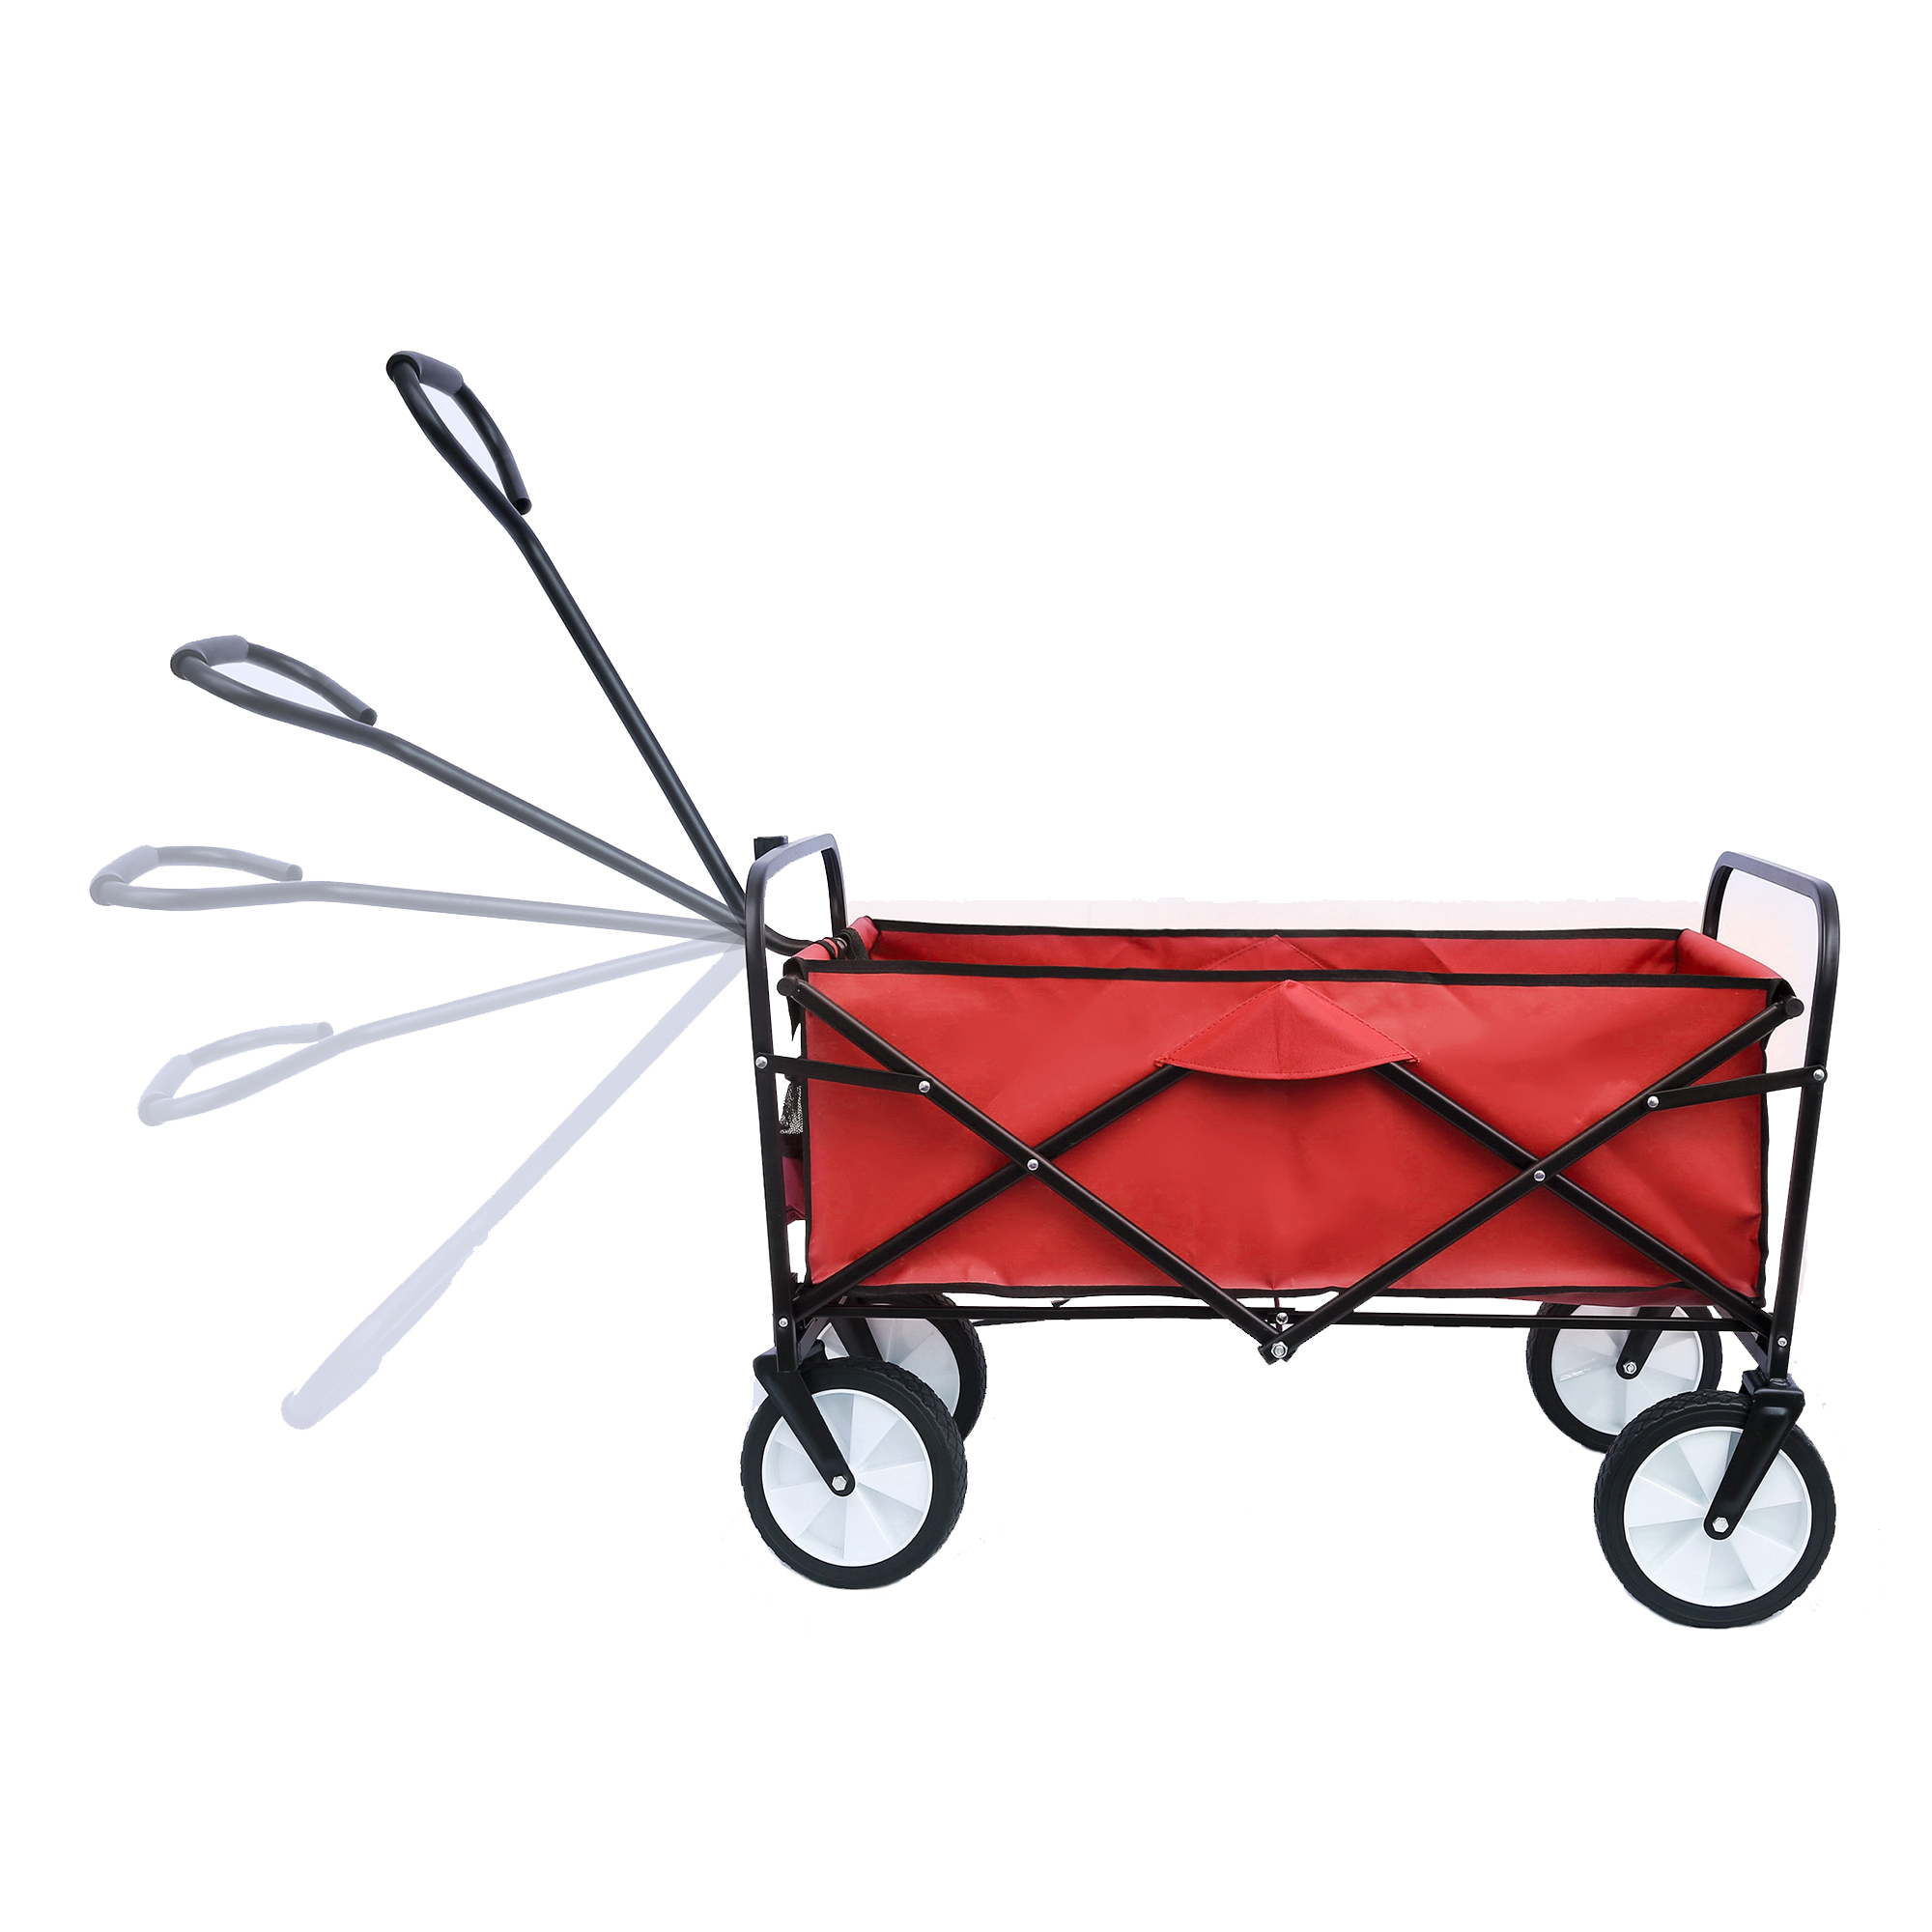 Beach Wagons with Big Wheels for Sand, Sturdy Steel Frame Collapsible Wagon, Foldable Wagon, Grocery Wagon with 2 Mesh Cup Holders, Adjustable Handle for Garden Shopping Picnic Beach, Red, Q3809 - image 5 of 11